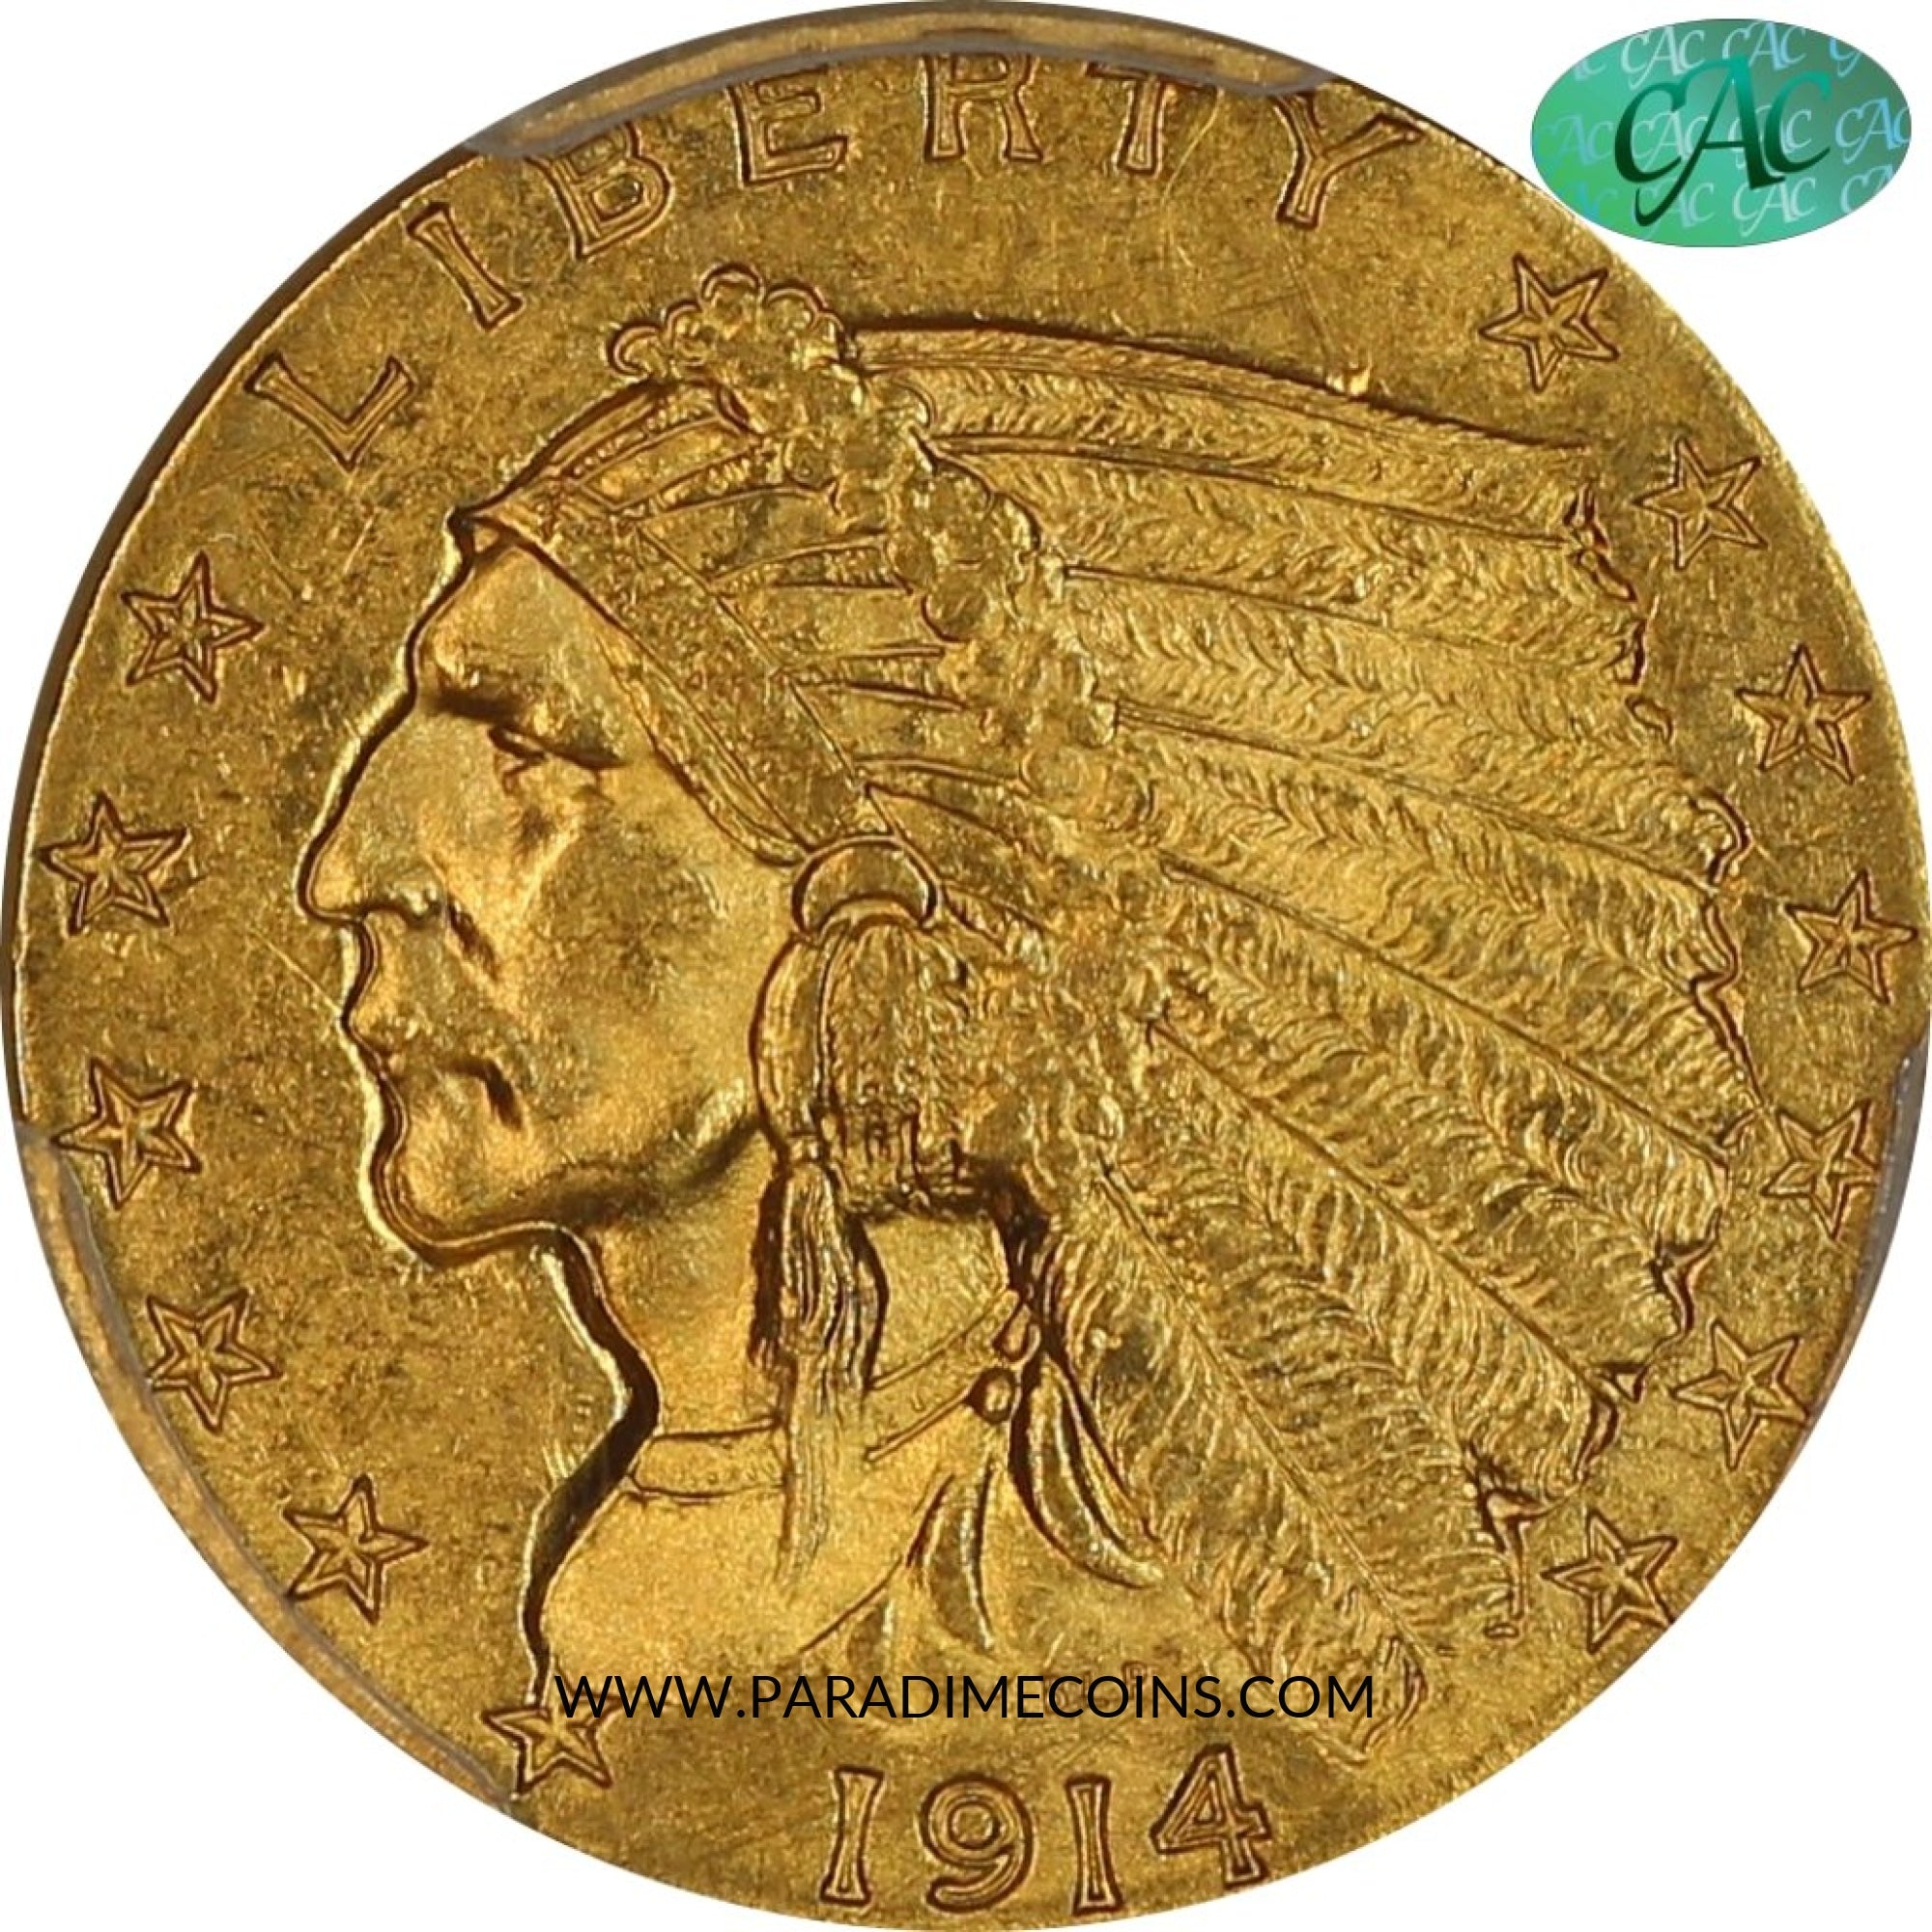 1914 $2.5 MS62 PCGS CAC - Paradime Coins | PCGS NGC CACG CAC Rare US Numismatic Coins For Sale